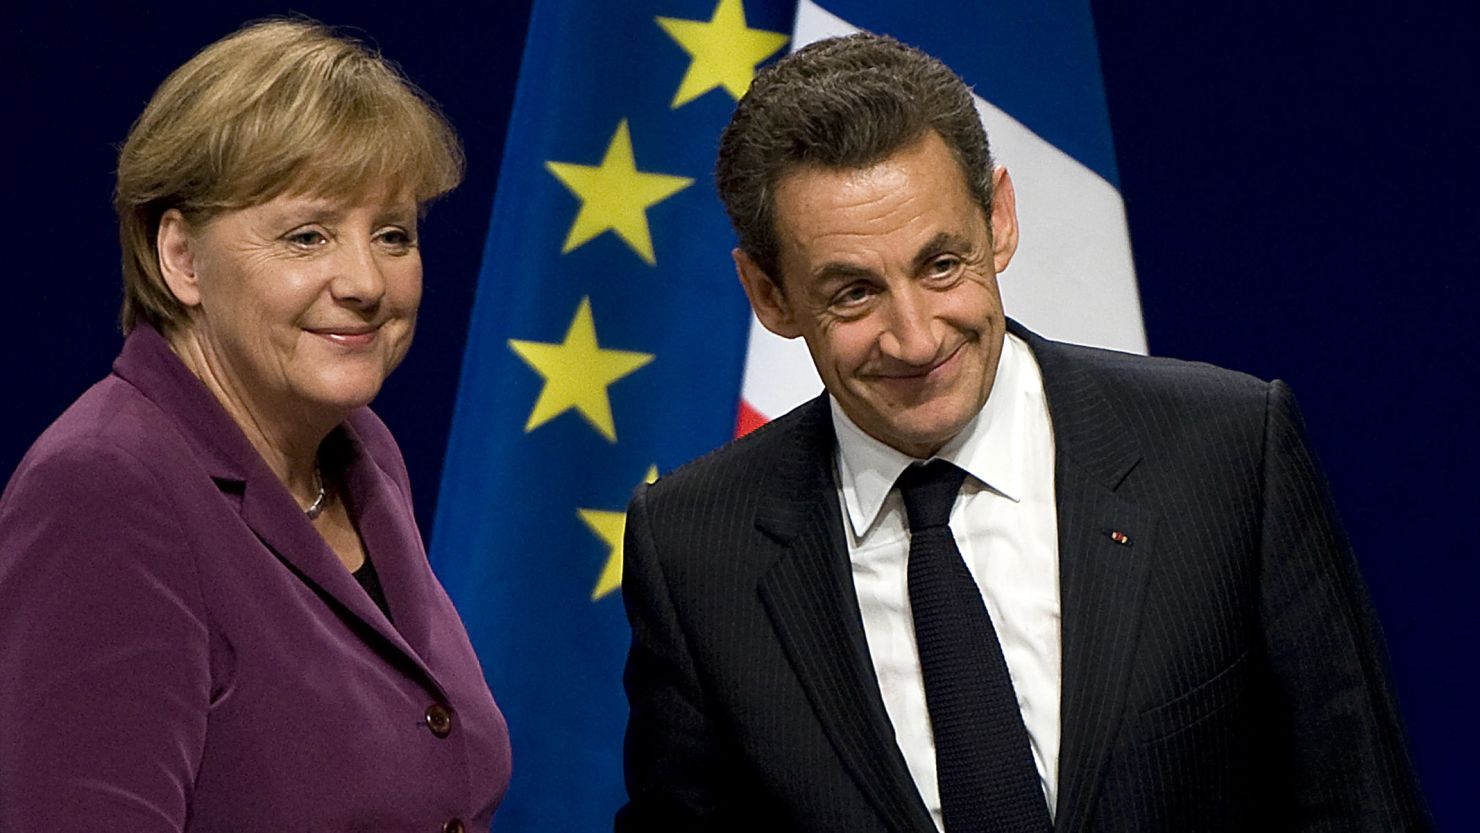 Hedge funds are betting that financial troubles aren't over for German Chancellor Angela Merkel, left,  and French President Nicolas Sarkozy.